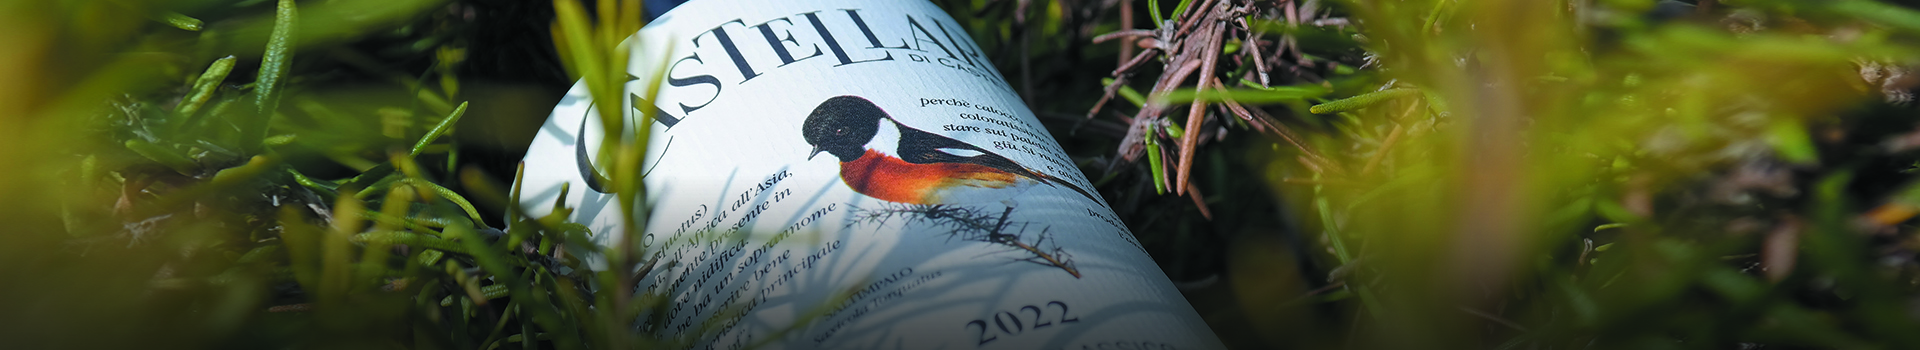 THE 2022 VINTAGE OF CASTELLARE’S CHIANTI CLASSICO IS READY TO BE TASTED